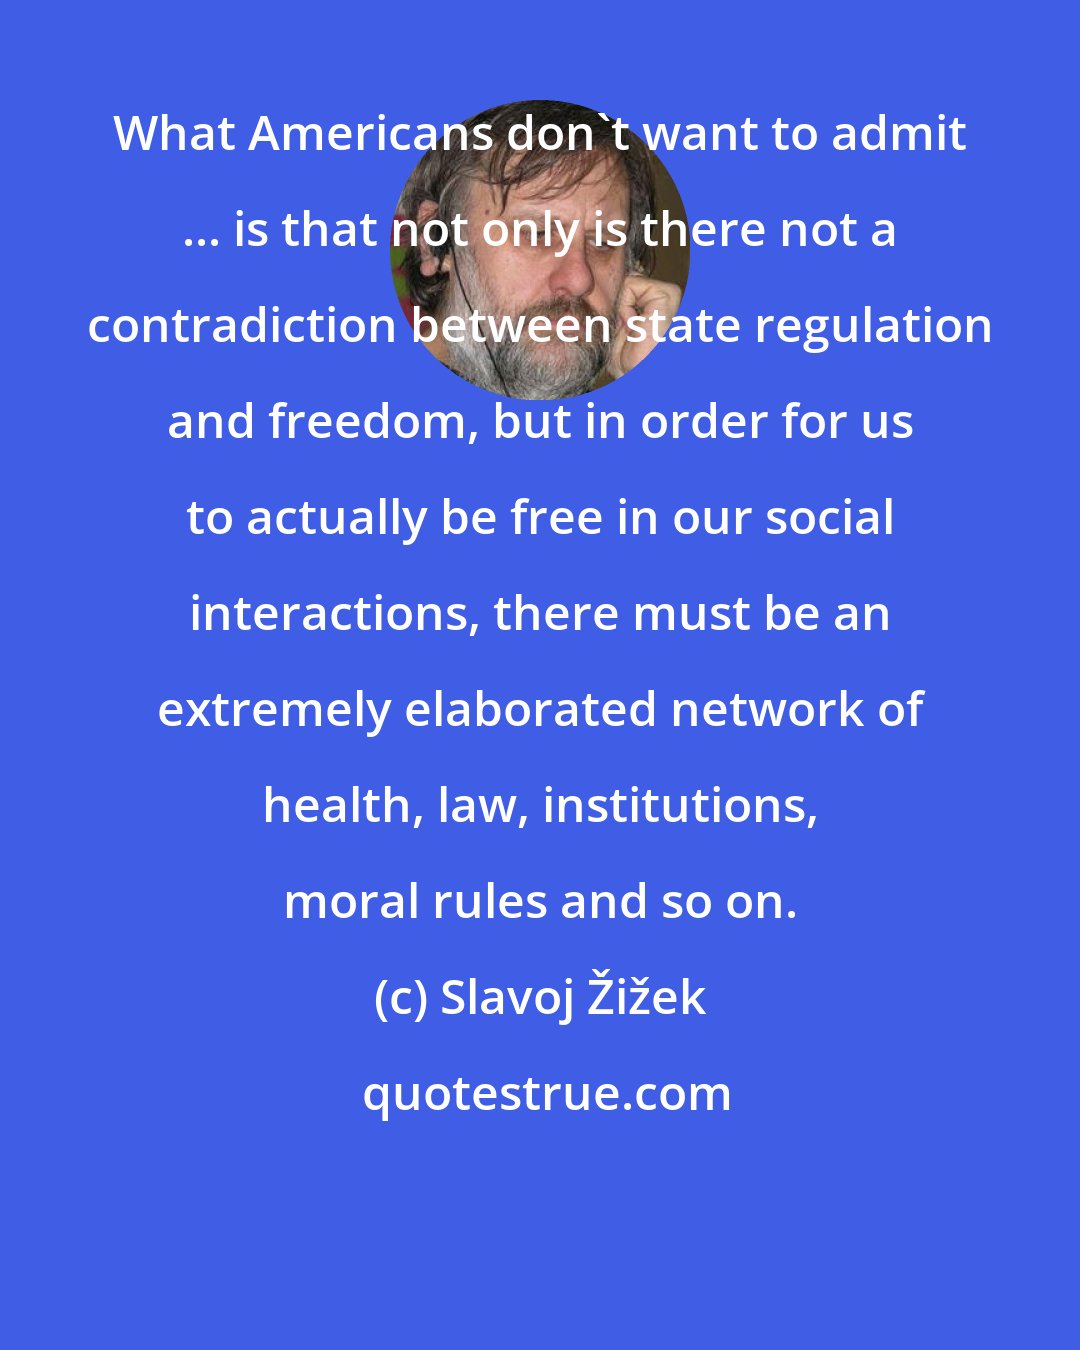 Slavoj Žižek: What Americans don't want to admit ... is that not only is there not a contradiction between state regulation and freedom, but in order for us to actually be free in our social interactions, there must be an extremely elaborated network of health, law, institutions, moral rules and so on.